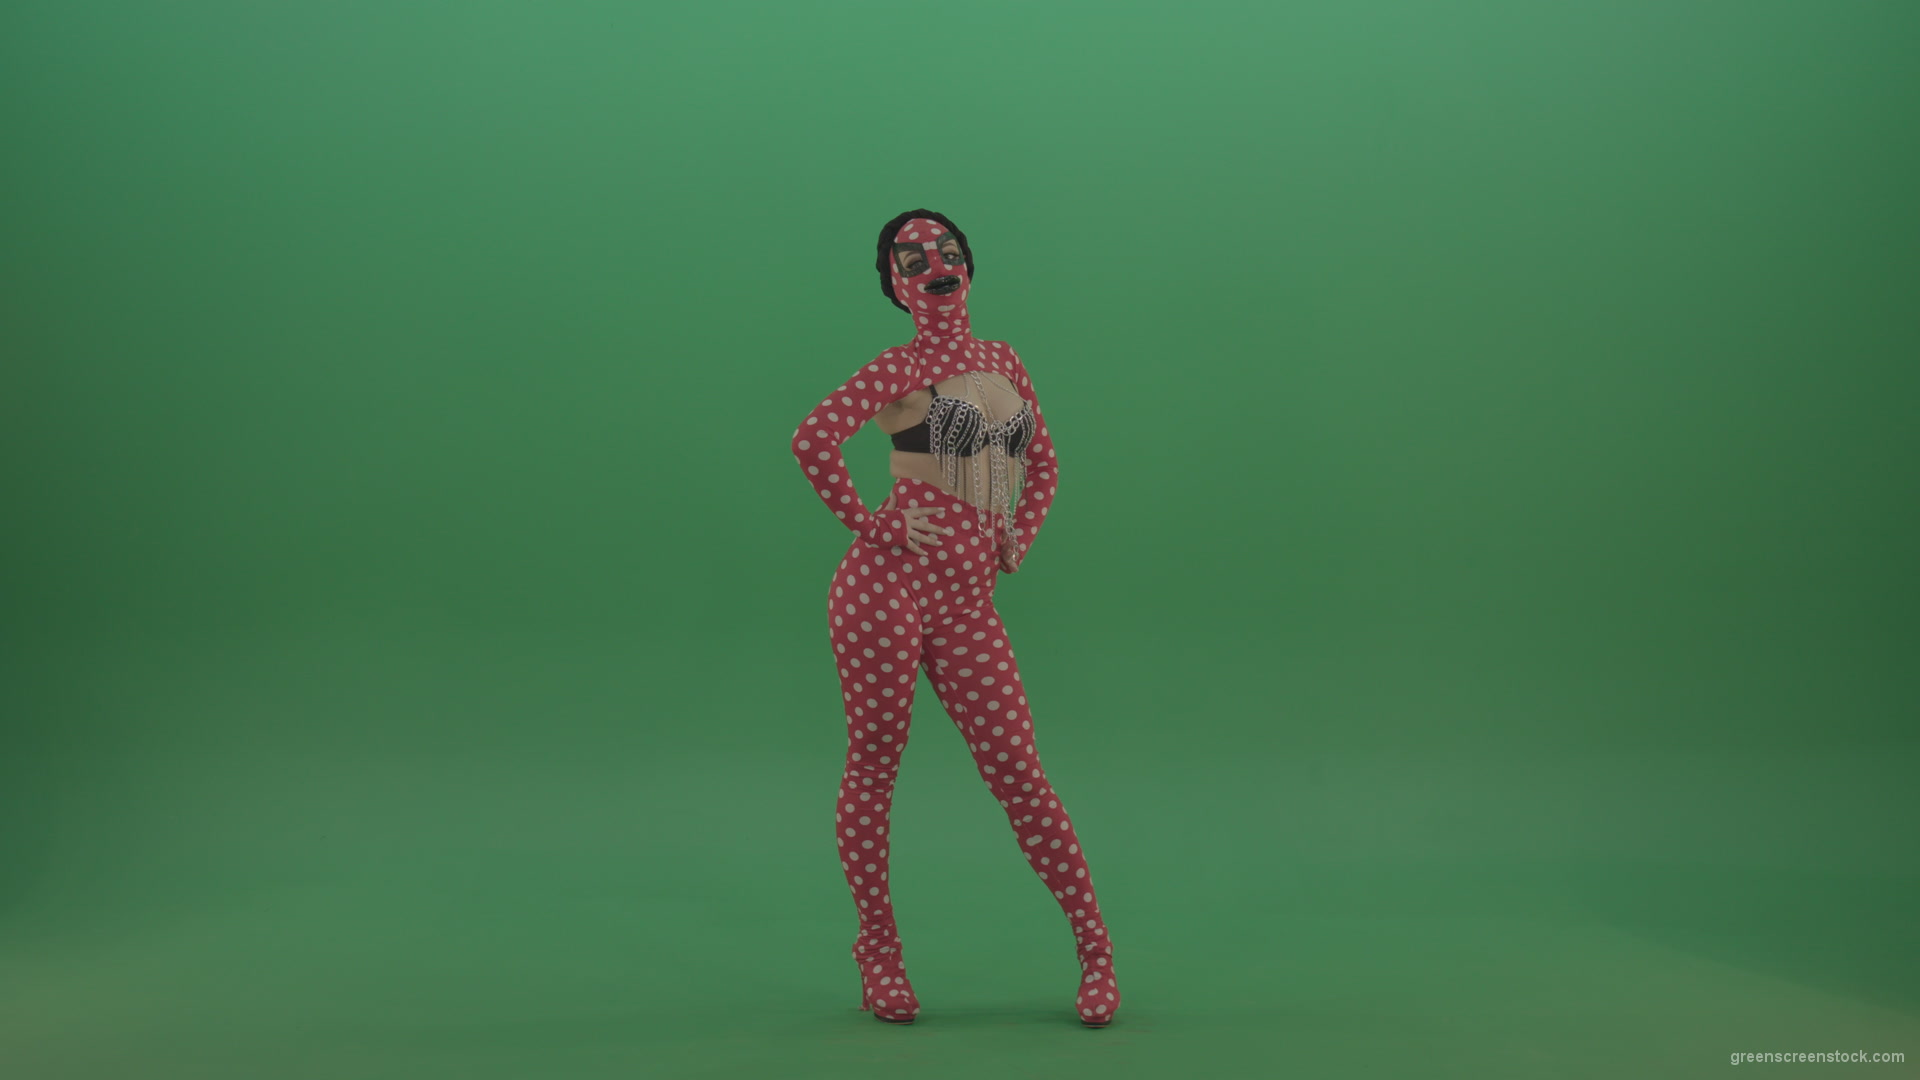 Girl-in-red-strip-dance-costume-in-front-view-posing-isolated-on-green-screen_007 Green Screen Stock